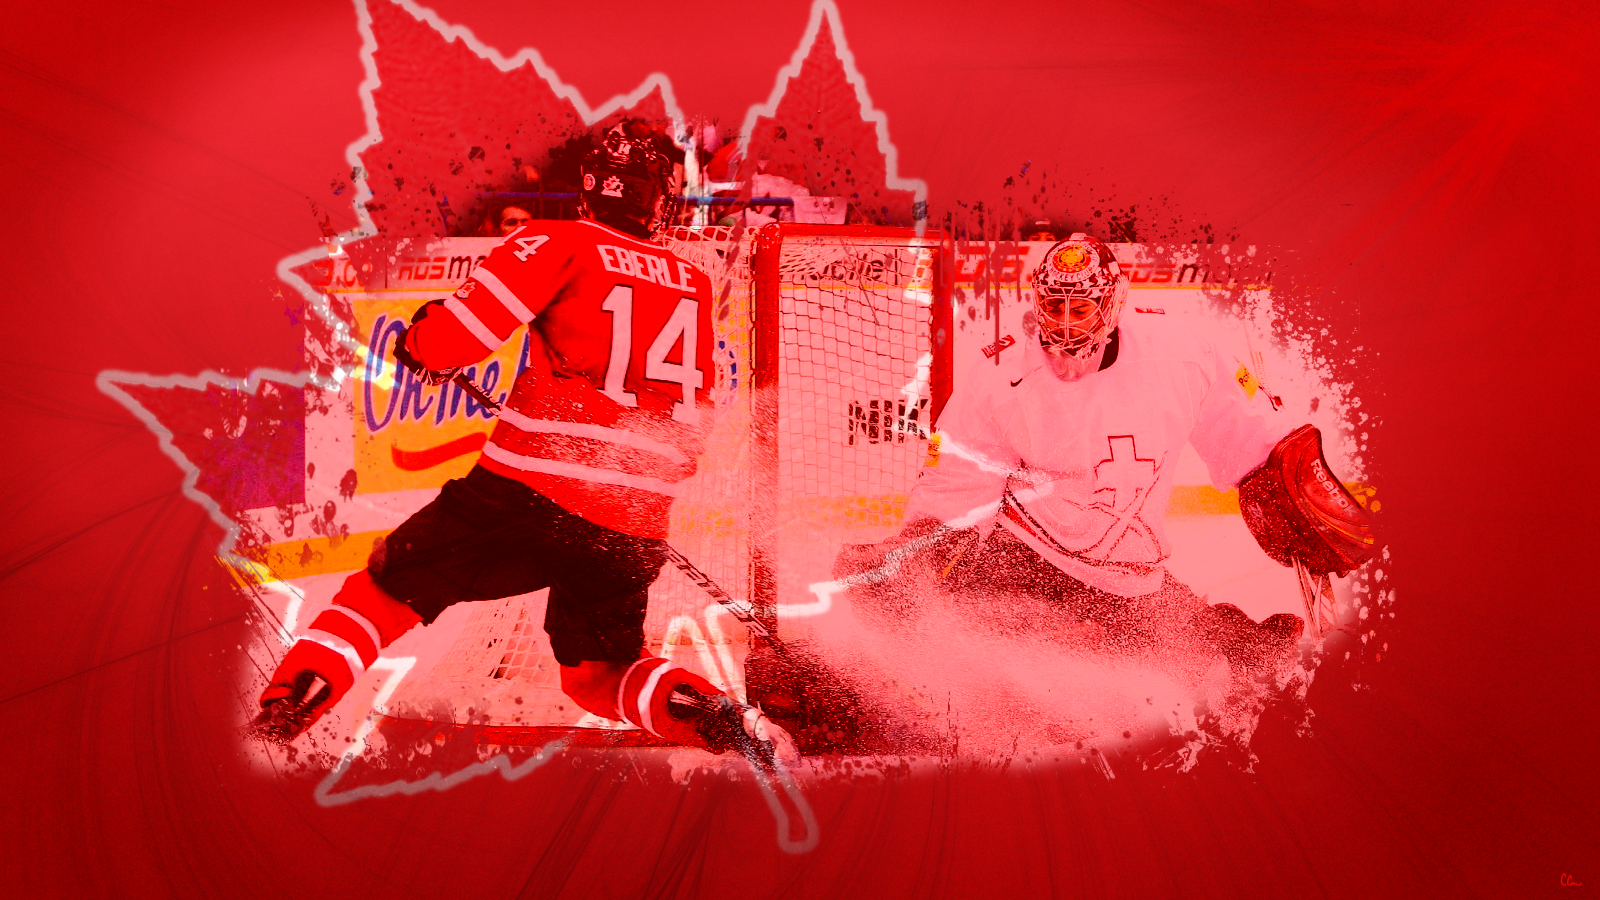 Free download you hate eberle canadianhockey sens oilers and team canada last edited [1600x900] for your Desktop, Mobile & Tablet. Explore Team Canada Wallpaper. Swat Team Wallpaper, Chicago Teams